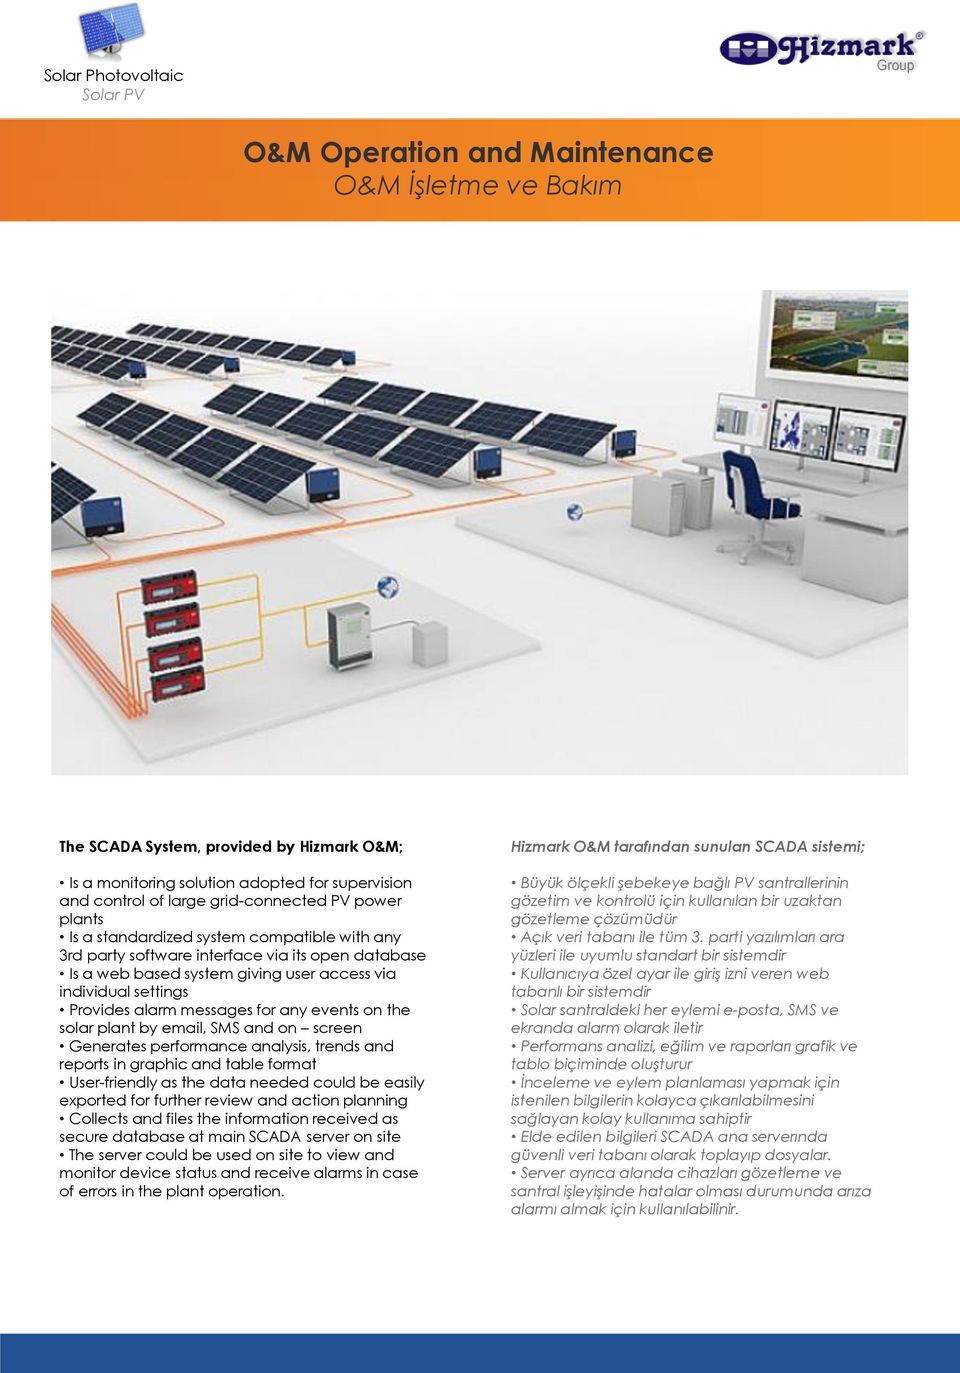 Provides alarm messages for any events on the solar plant by email, SMS and on screen Generates performance analysis, trends and reports in graphic and table format User-friendly as the data needed